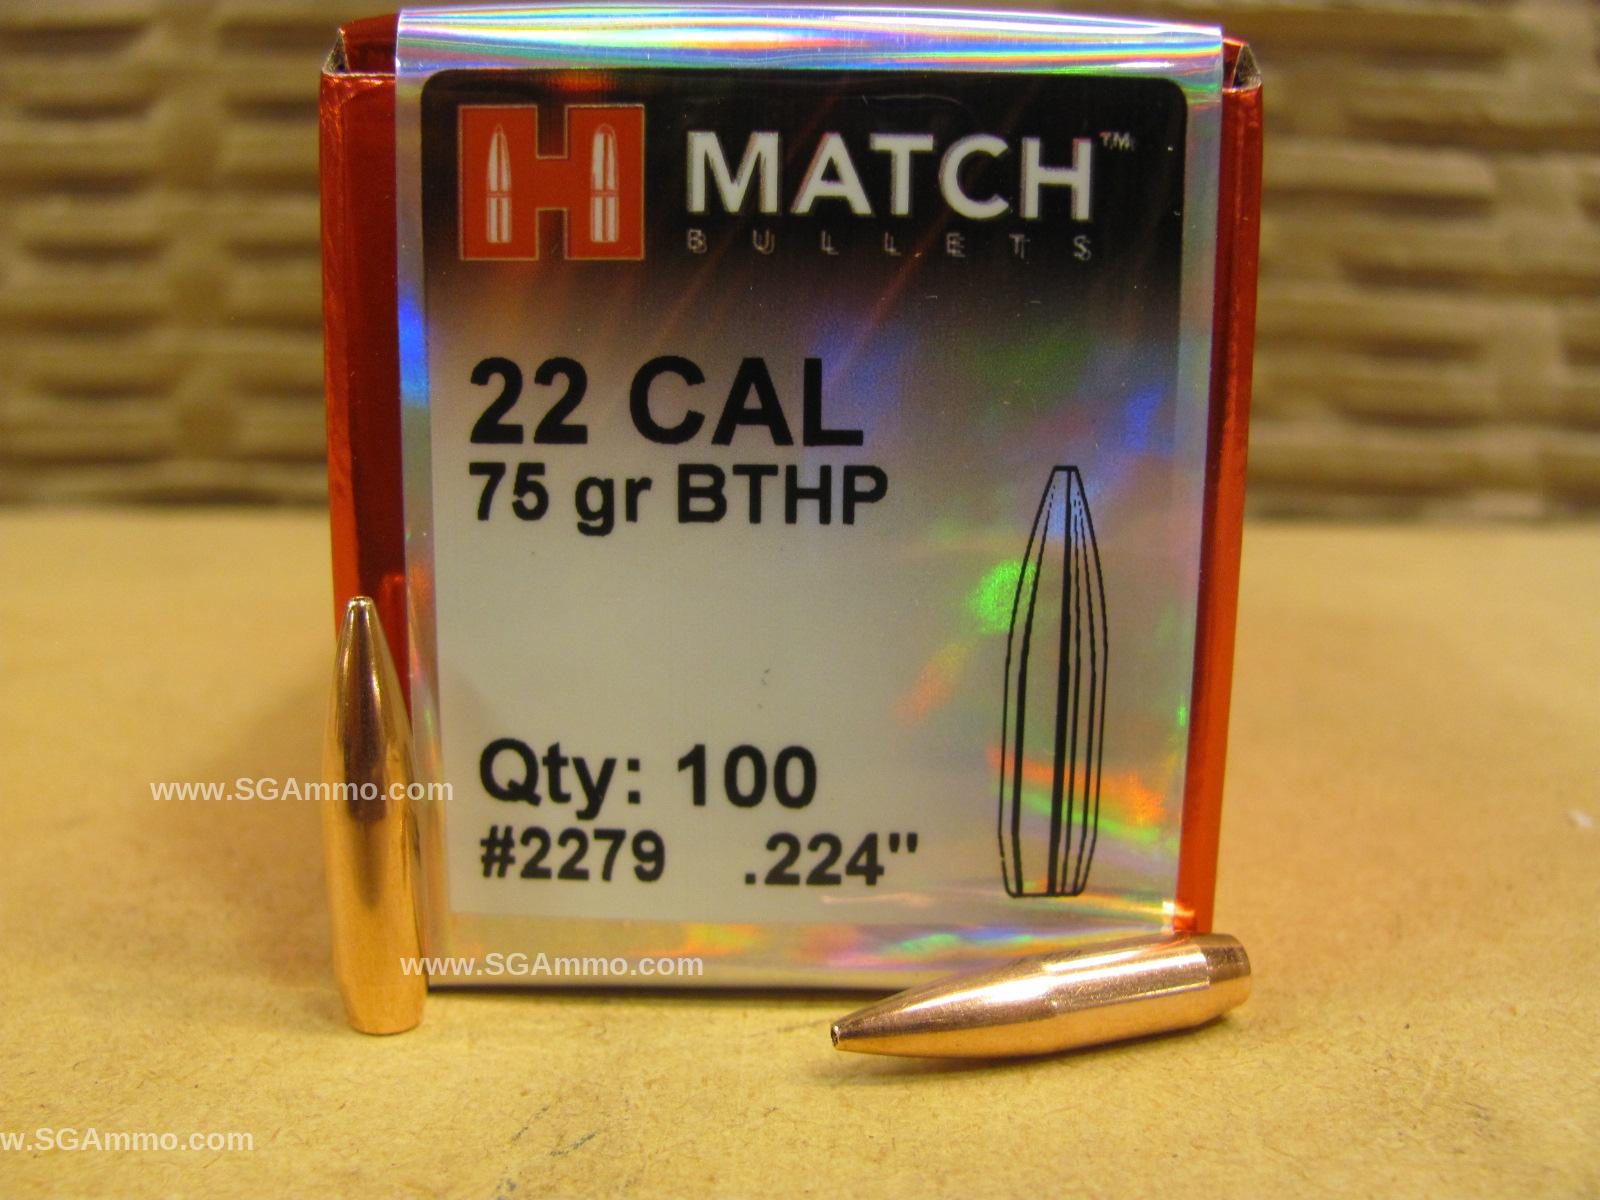 100 Count Box - 22 Cal 75 Grain BT Hollow Point Match Projectile For Handloading by Hornady .224